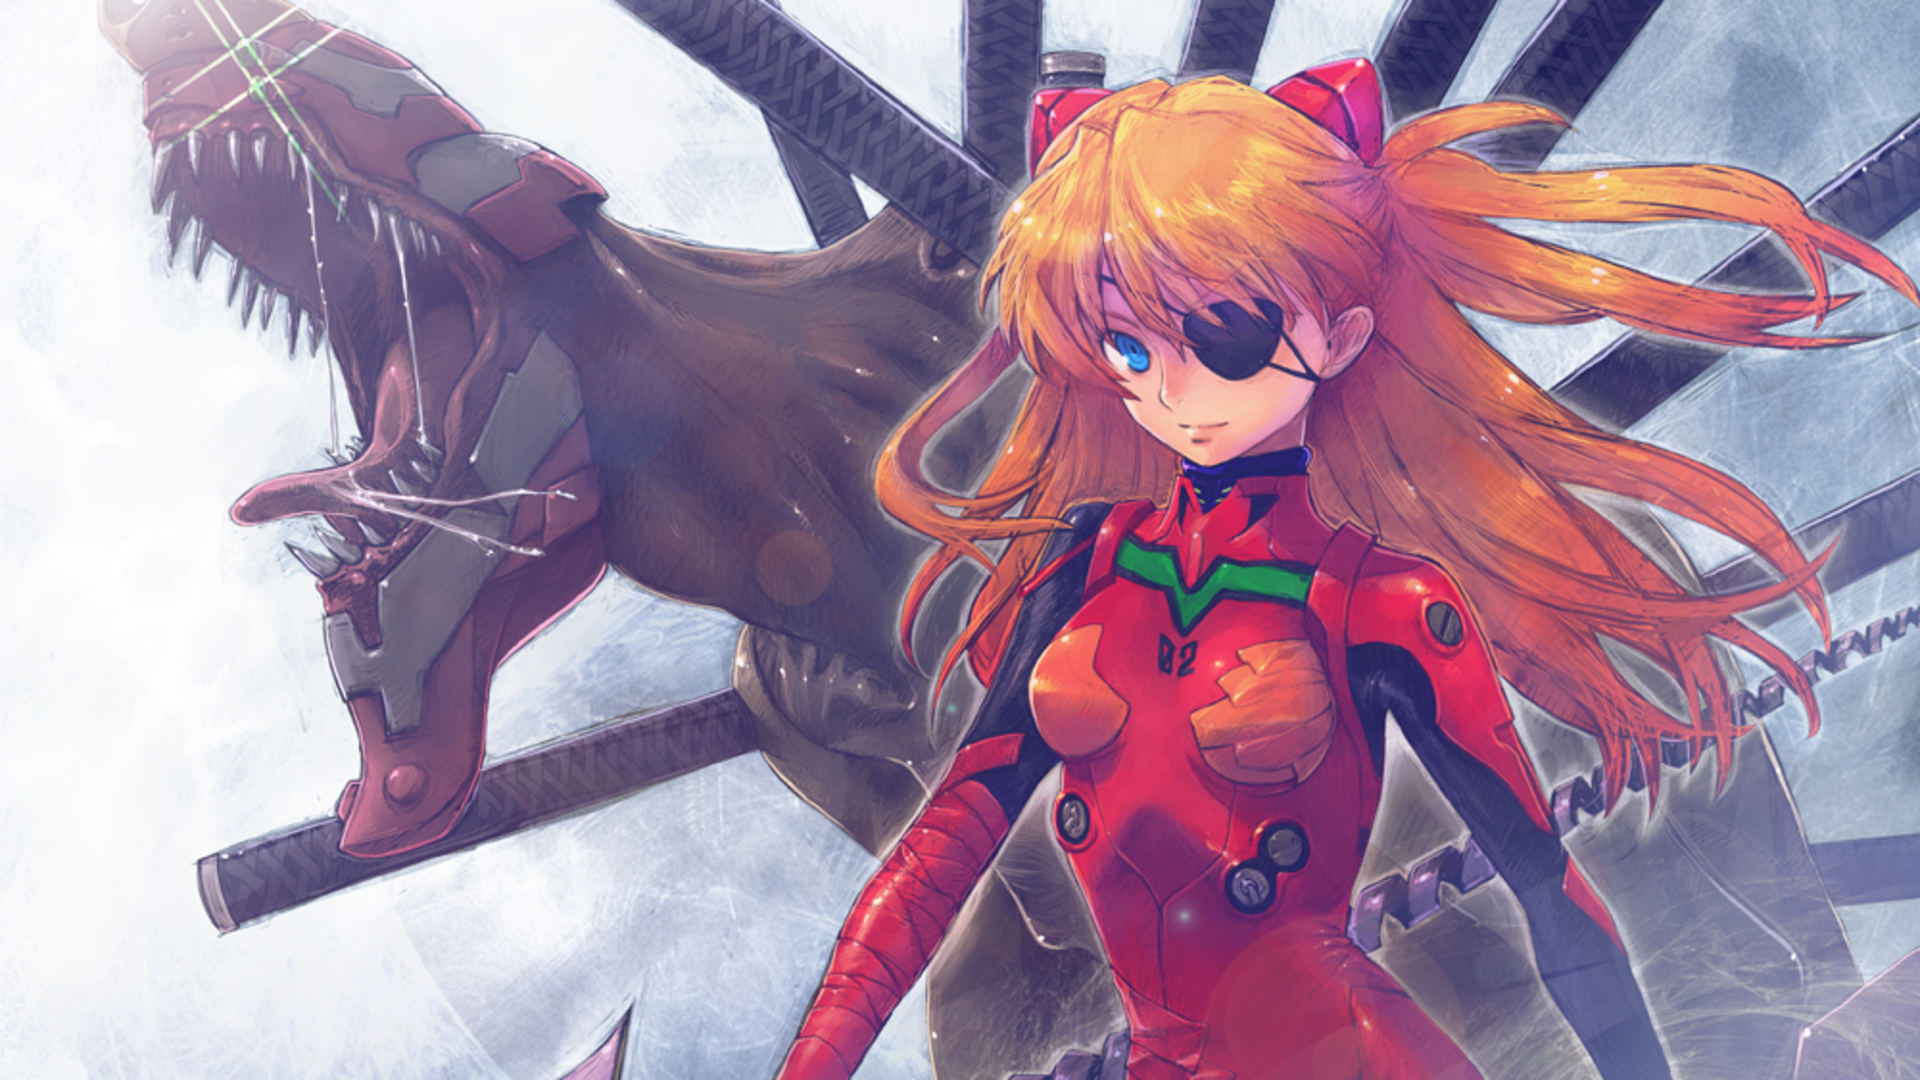 Anime Evangelion: 3.0 You Can (Not) Redo HD Wallpaper | Background Image